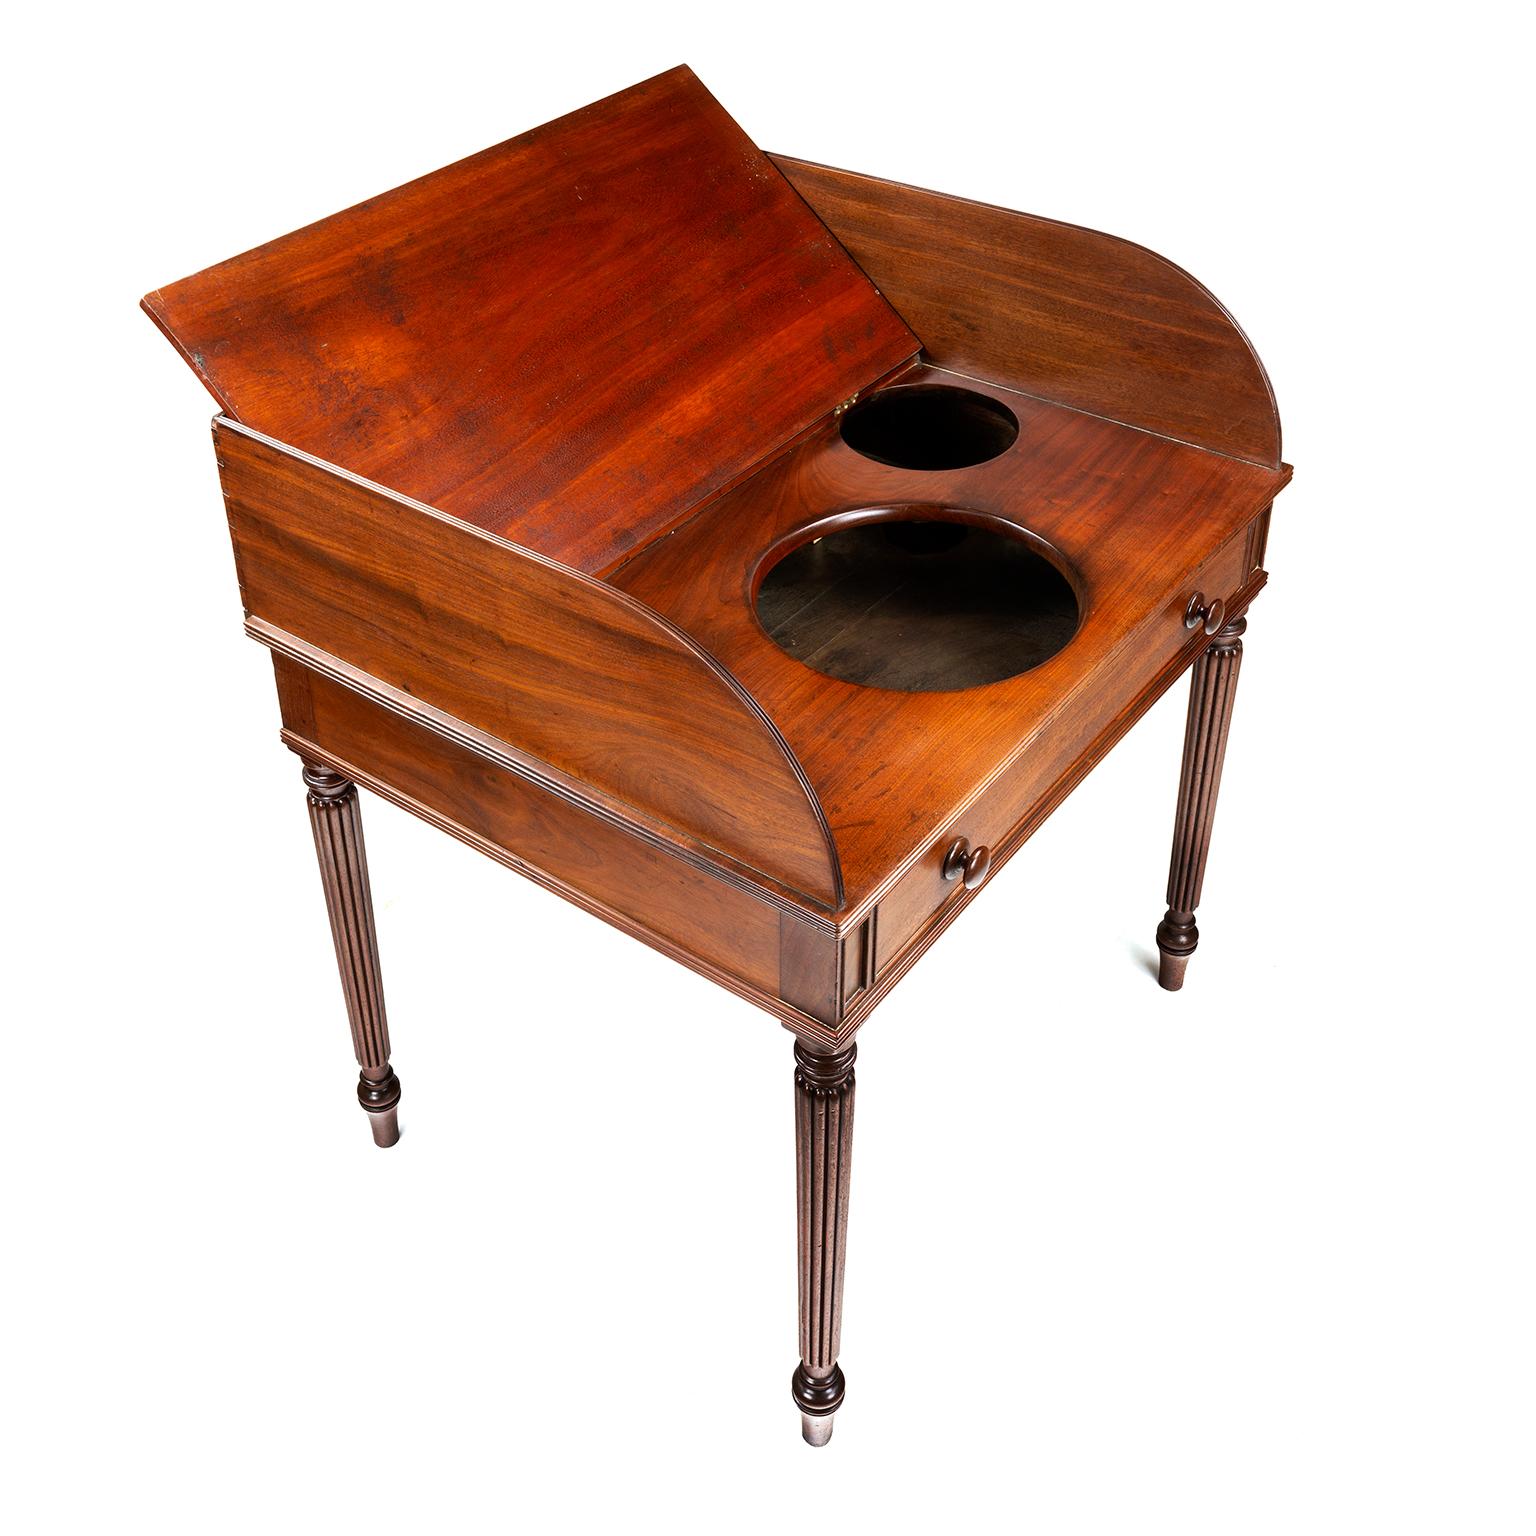 Regency Gillows wash stand / writing table in Mahogany 8